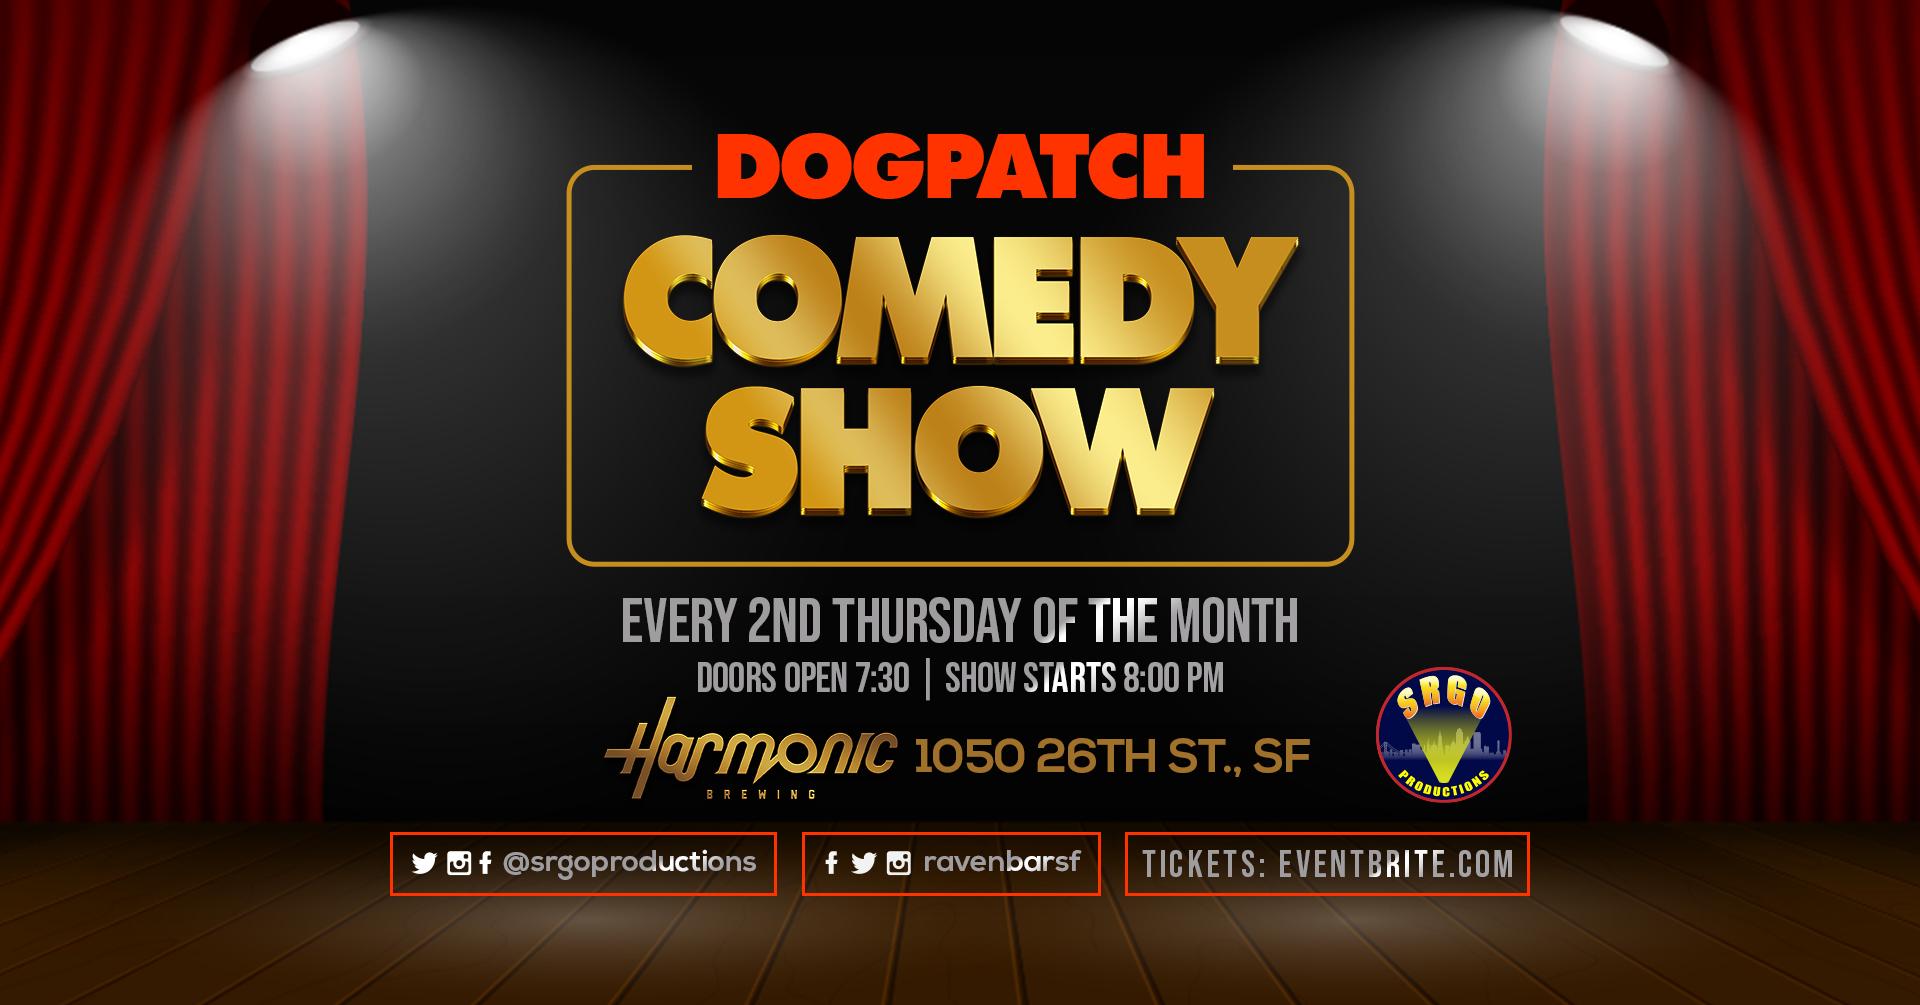 Dogpatch Comedy Show